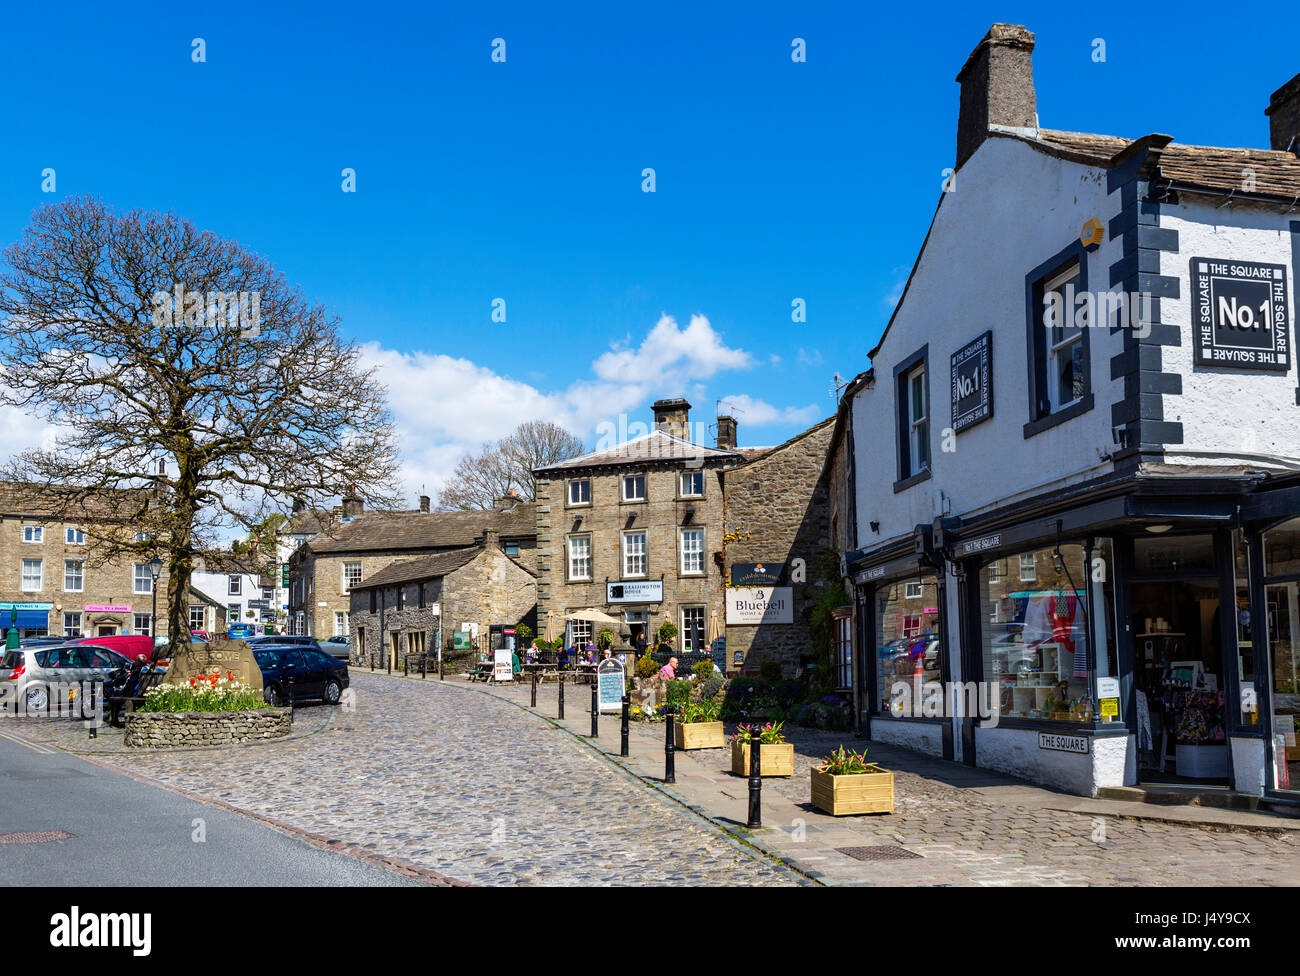 The Square in the  traditional English village of Grassington, Wharfedale, Yorkshire Dales National Park, North Yorkshire, England, UK. Stock Photo